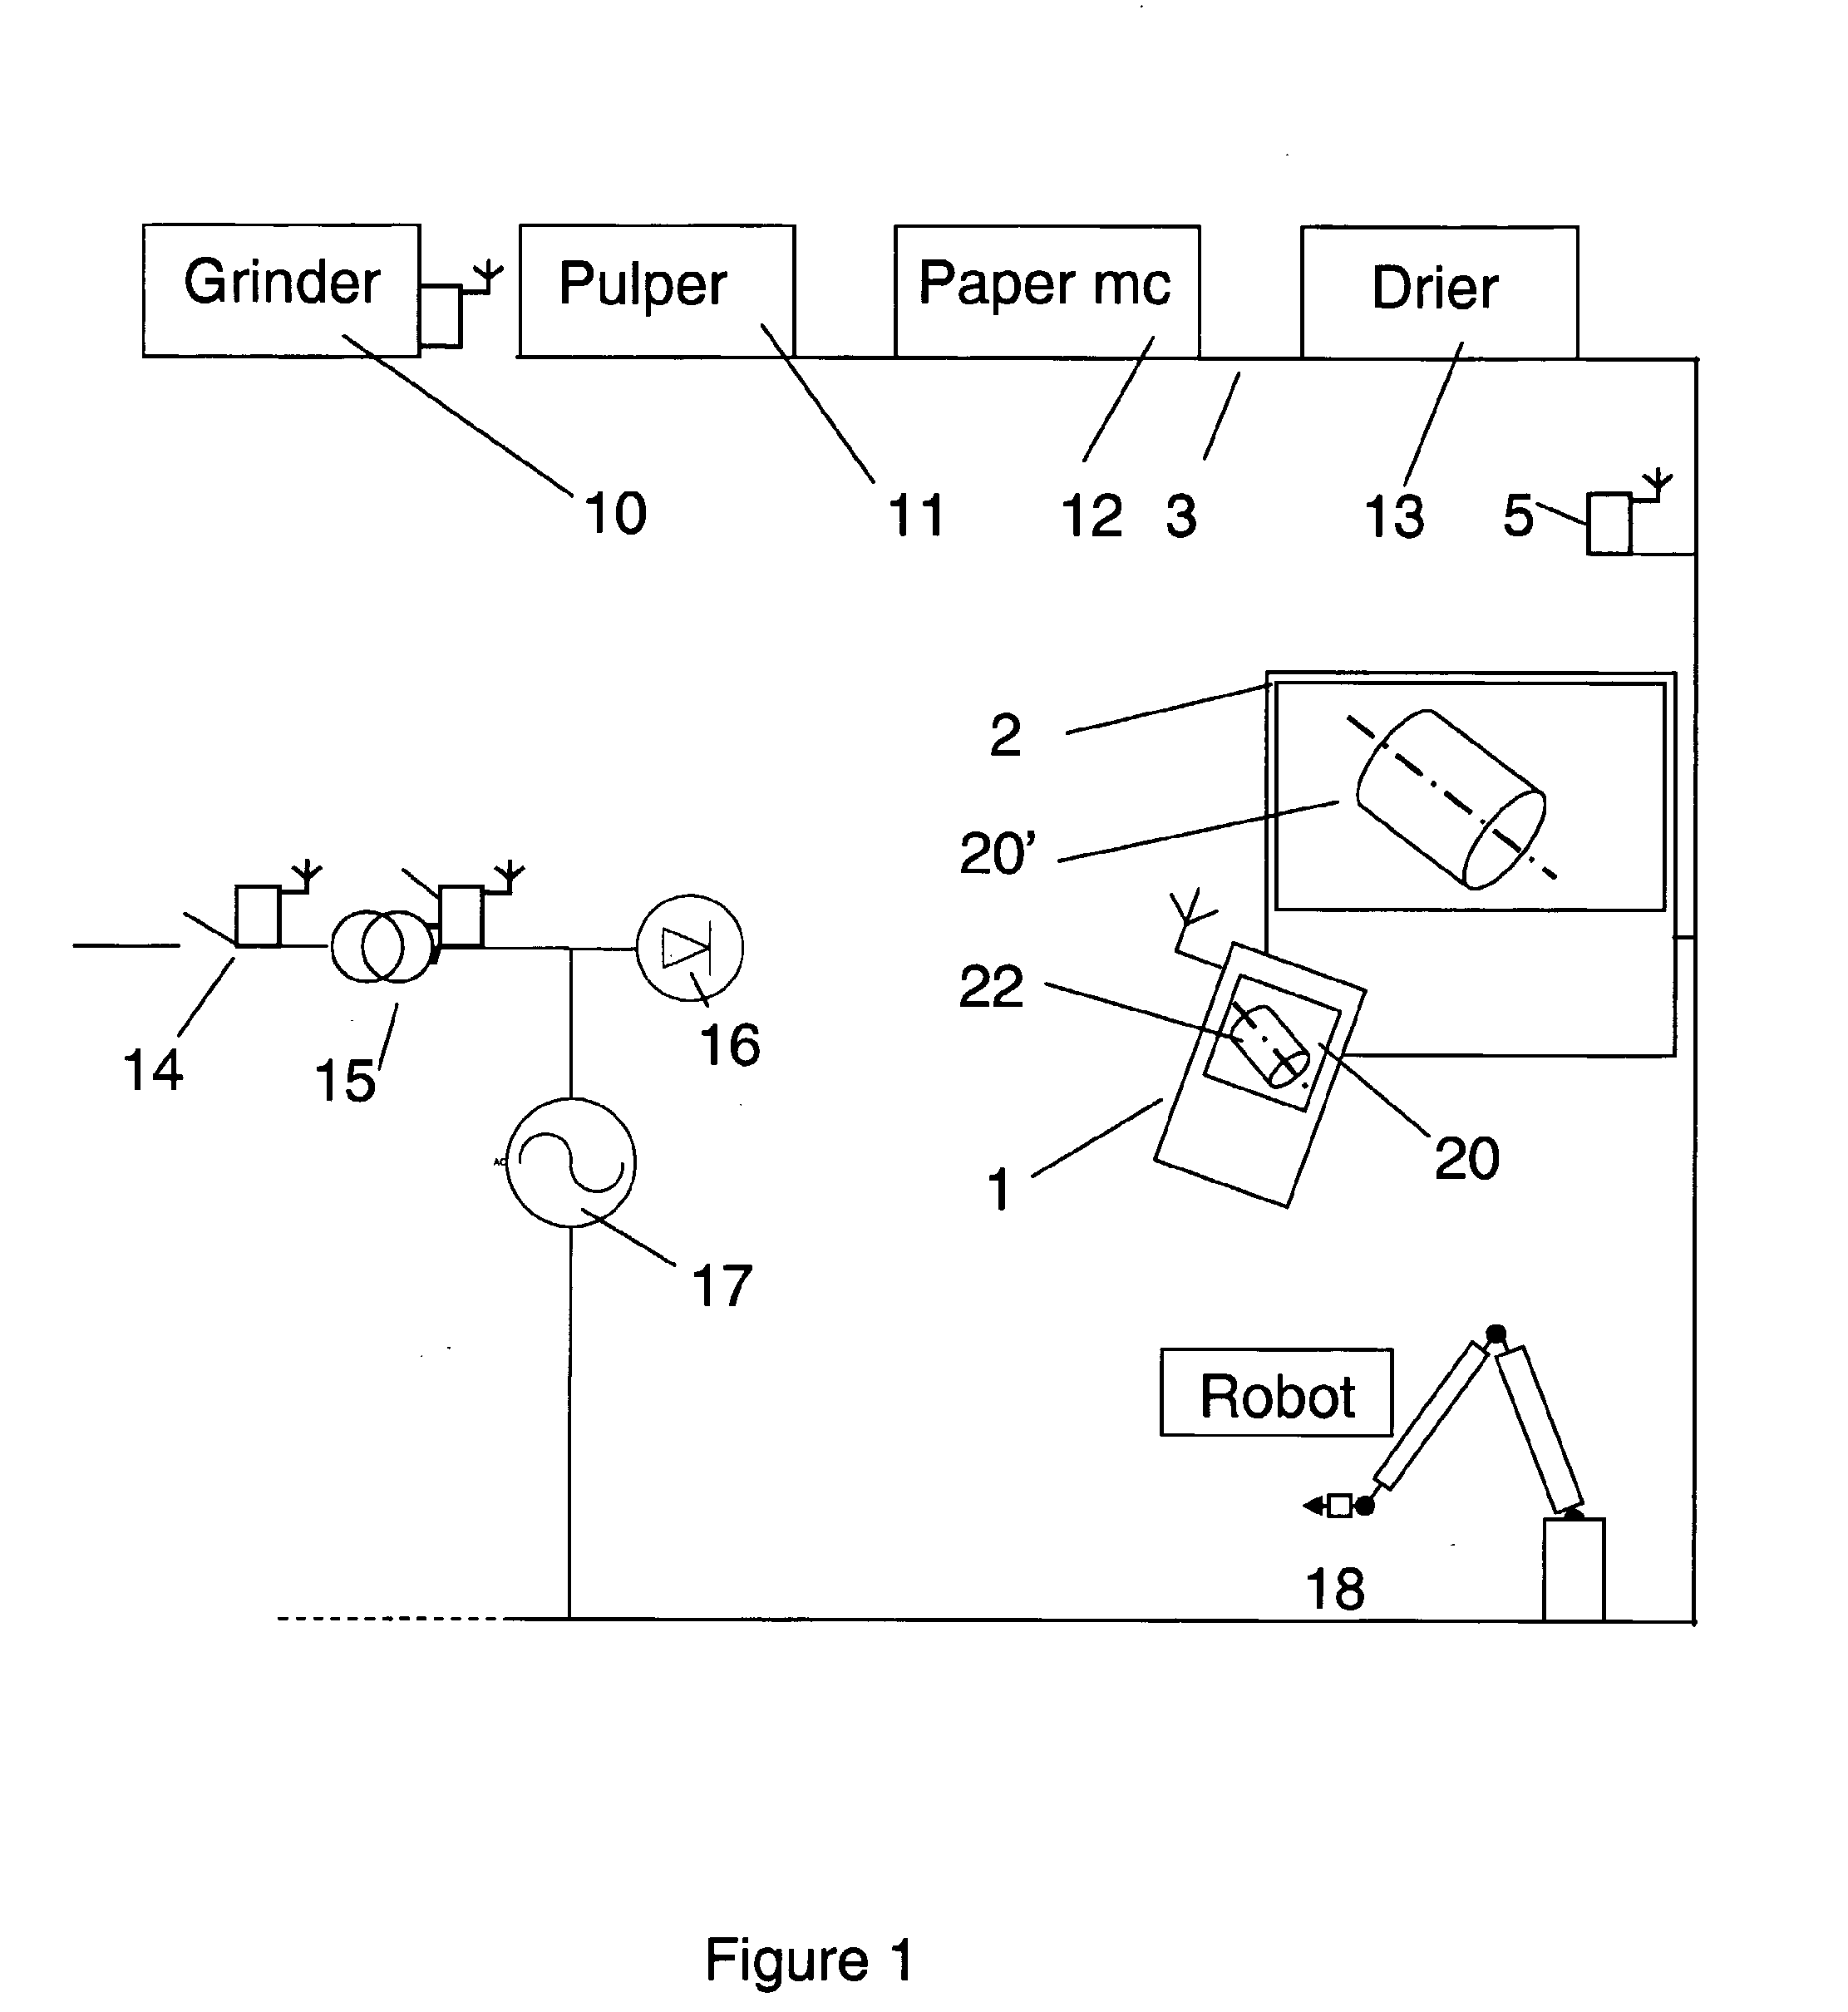 Method and System to Retrieve and Display Technical Data for an Industrial Device